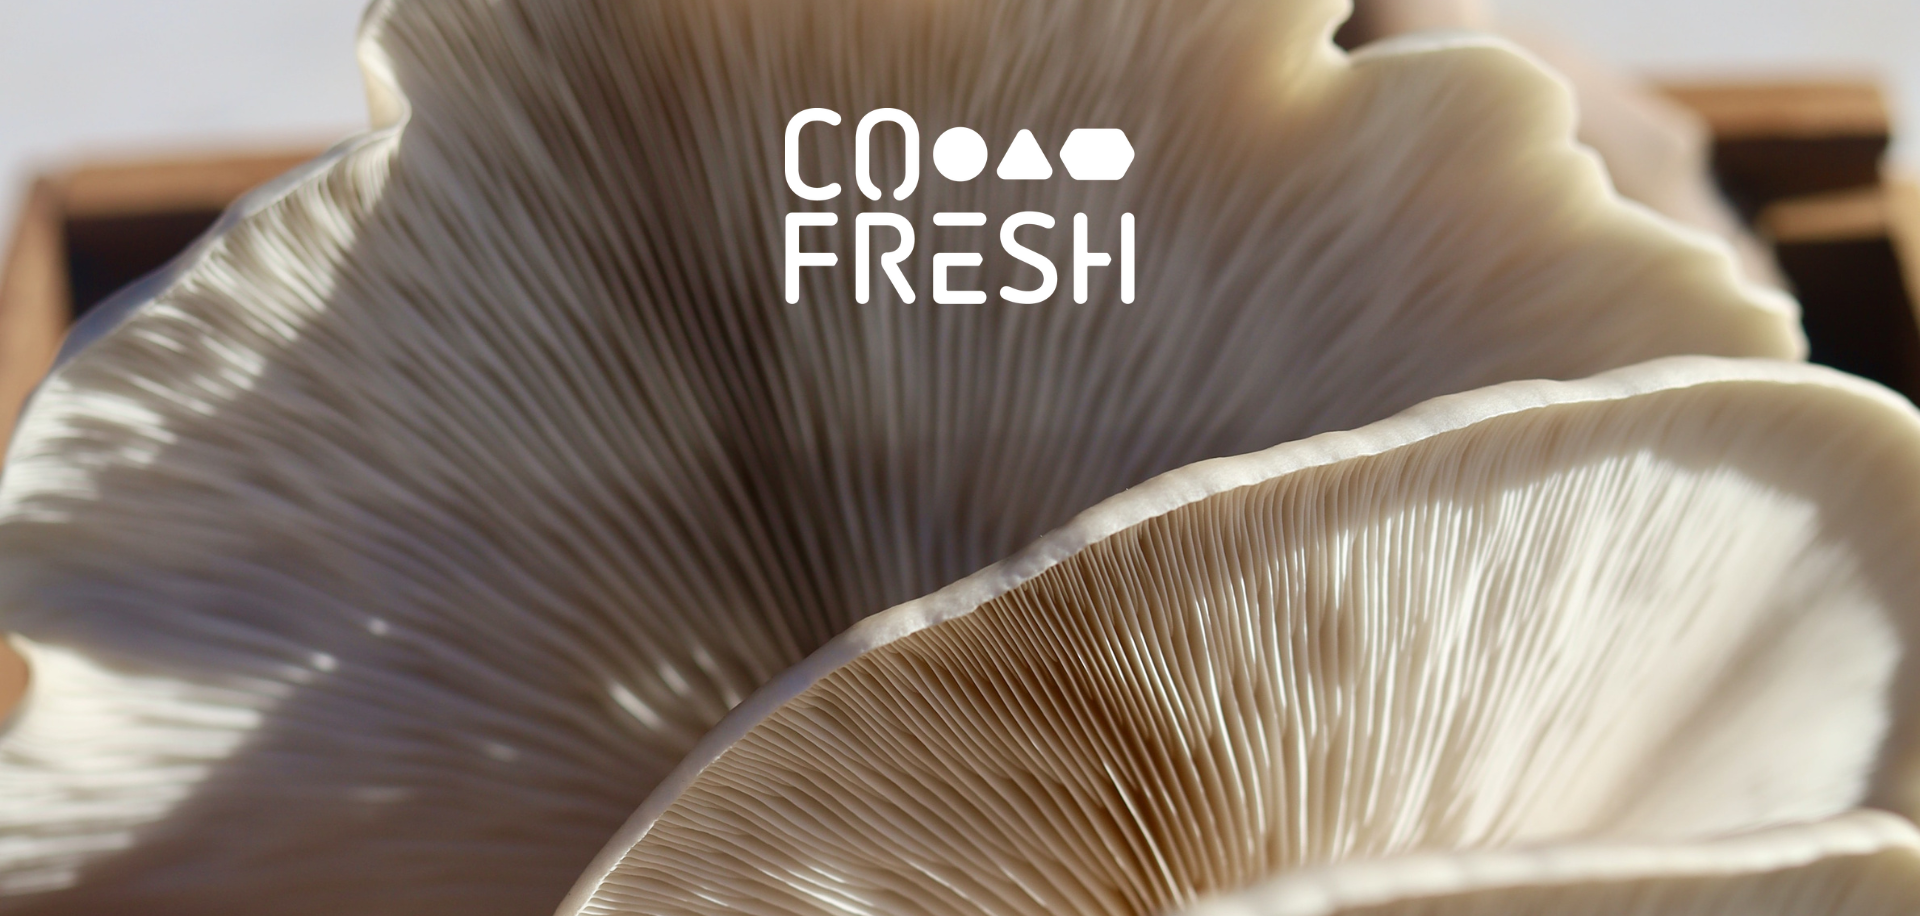 CO-FRESH, innovations to more competitive, resilient and sustainable food systems